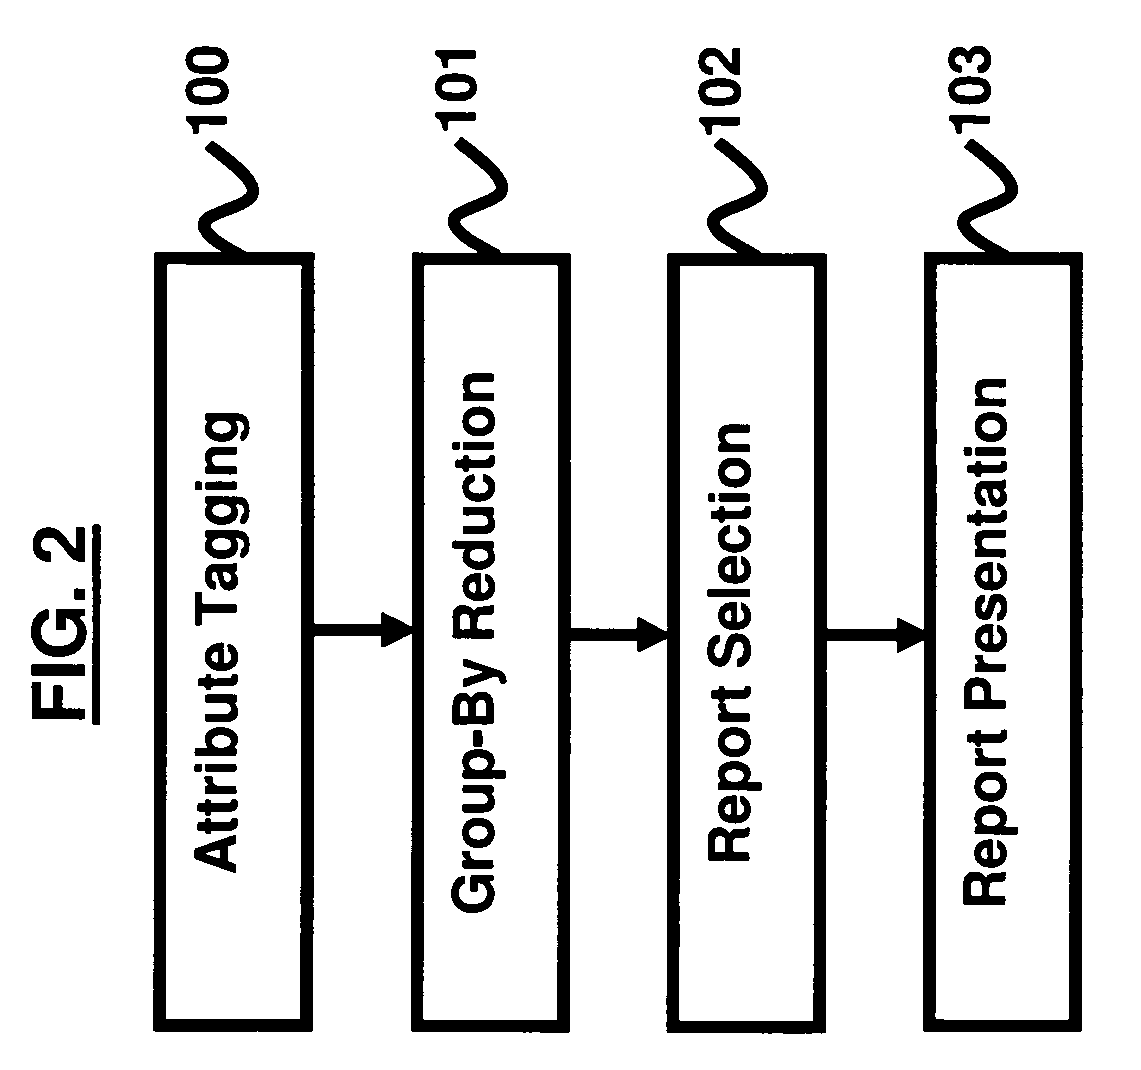 Domain independent system and method of automating data aggregation and presentation